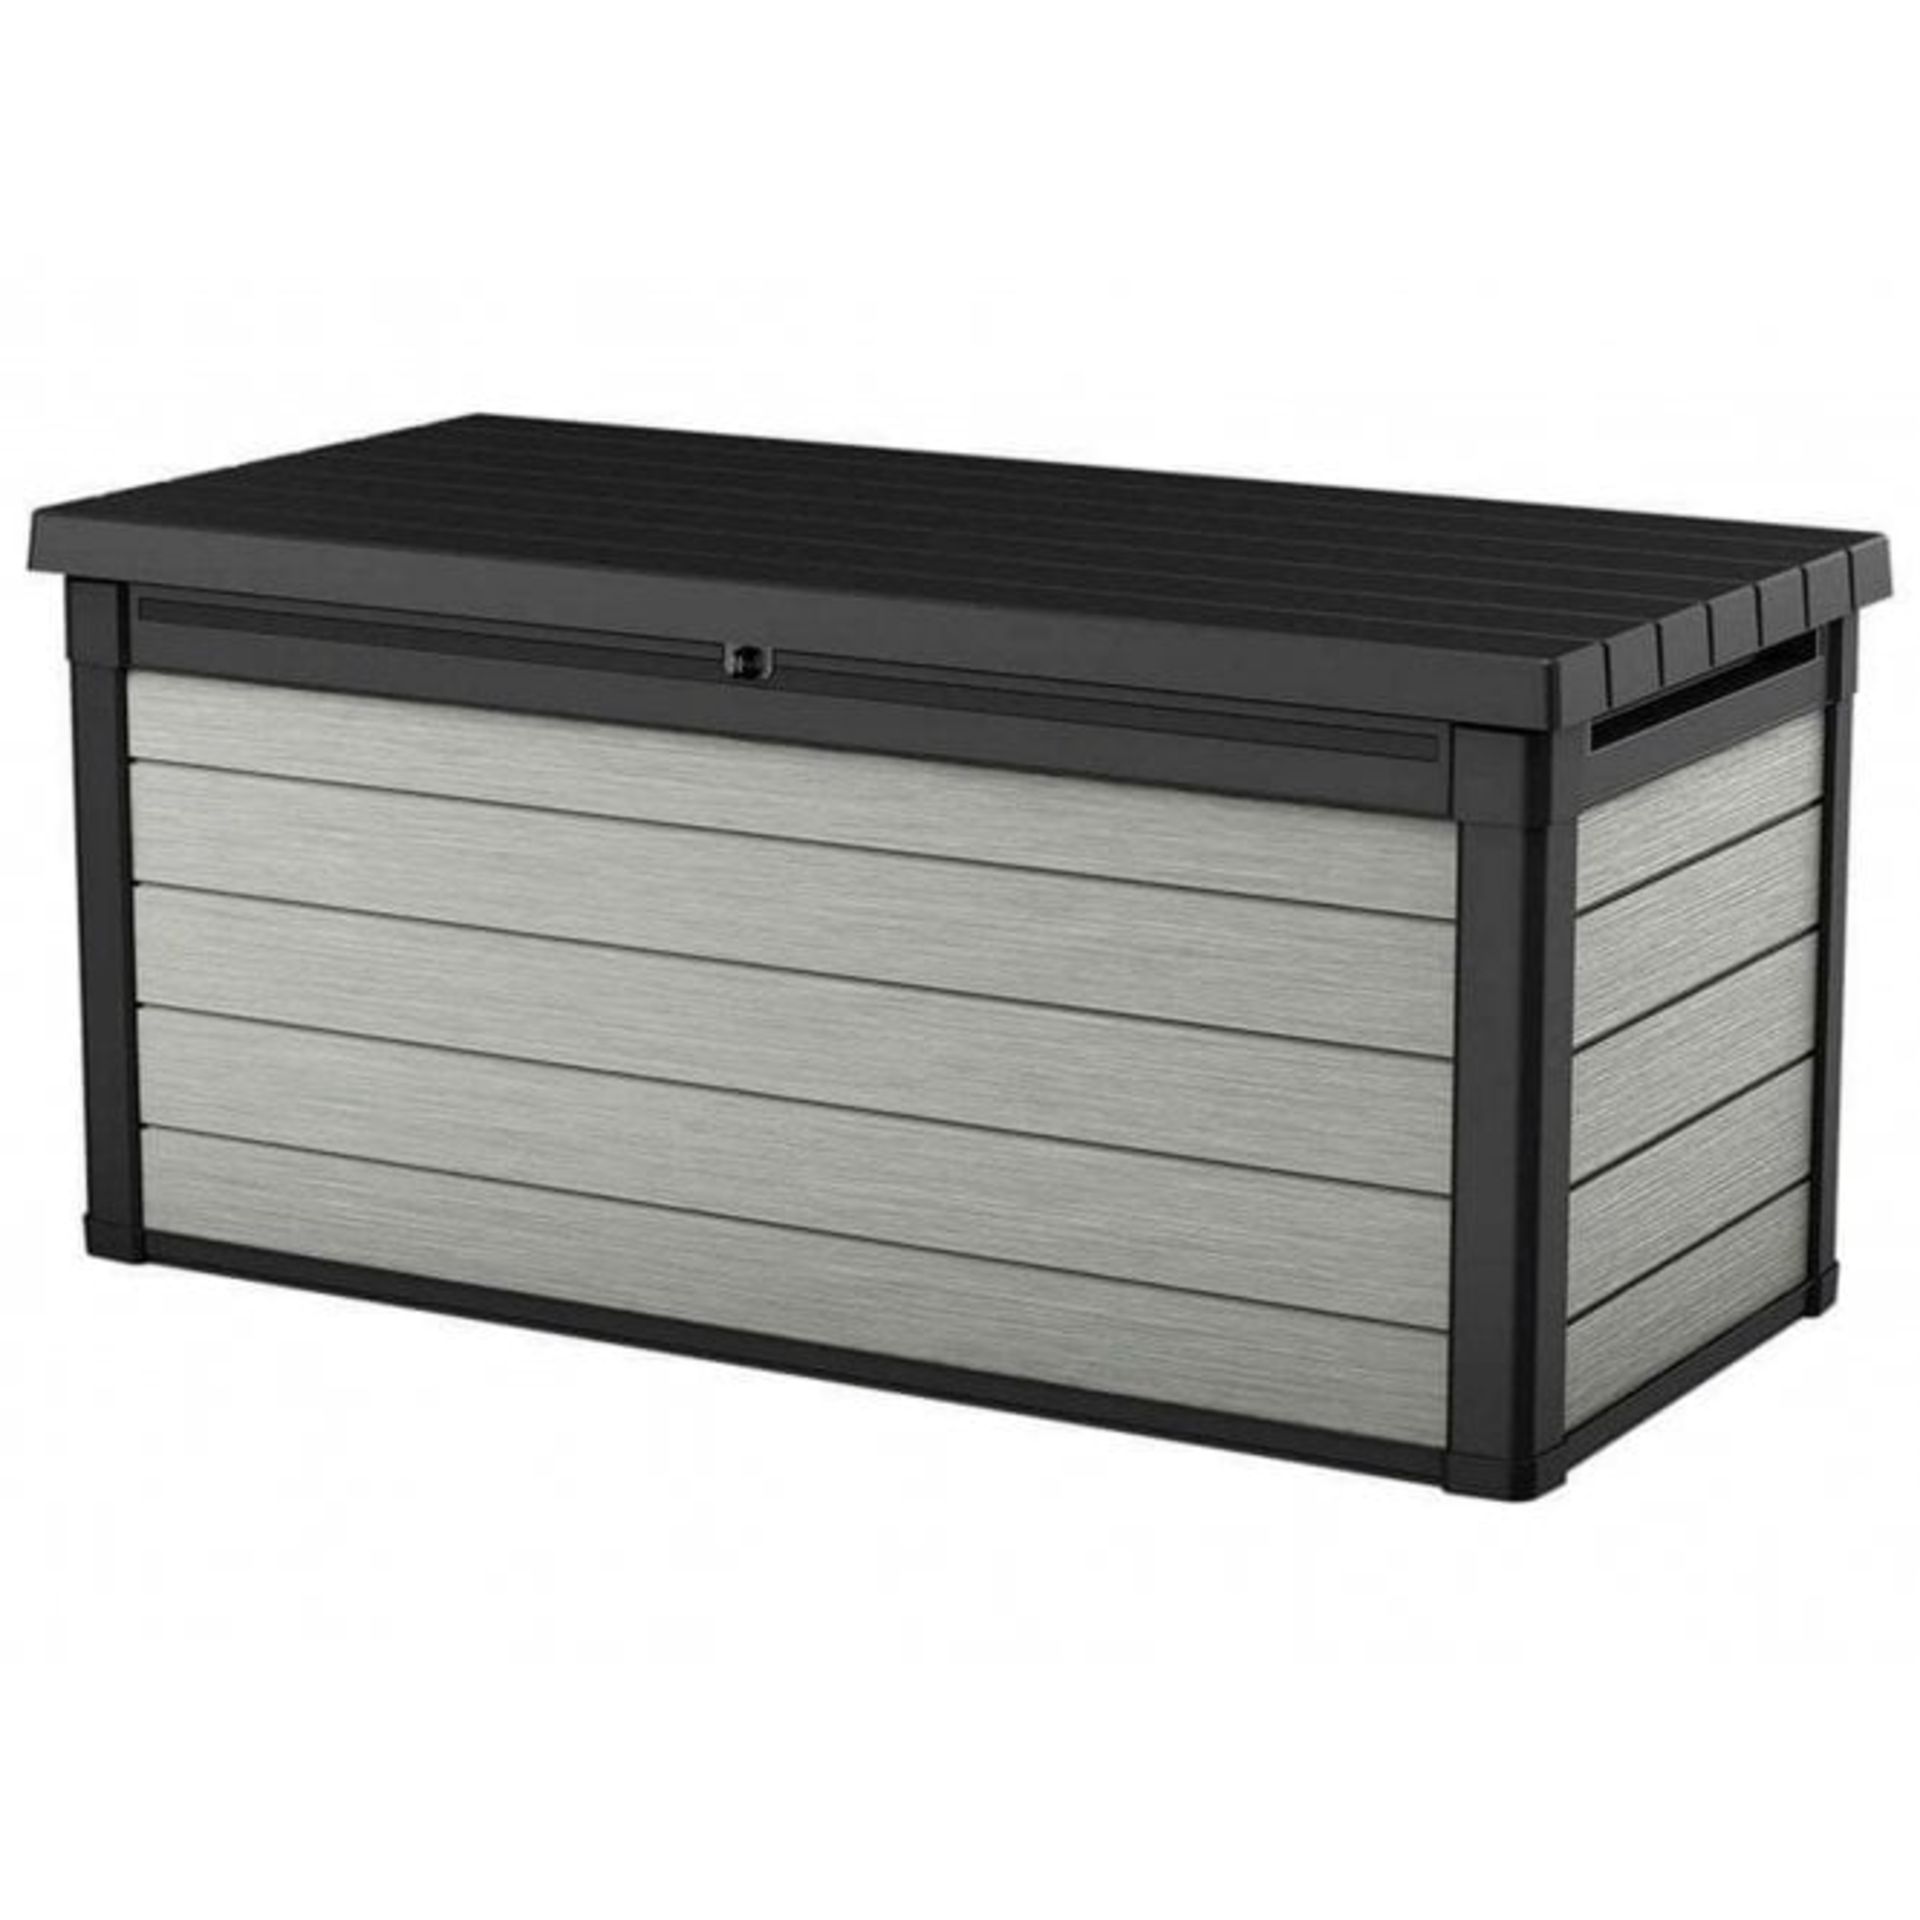 Keter Denali 150L Deck Box Sturdy and versatile, the Denali 150L Deck Box is the perfect solution to